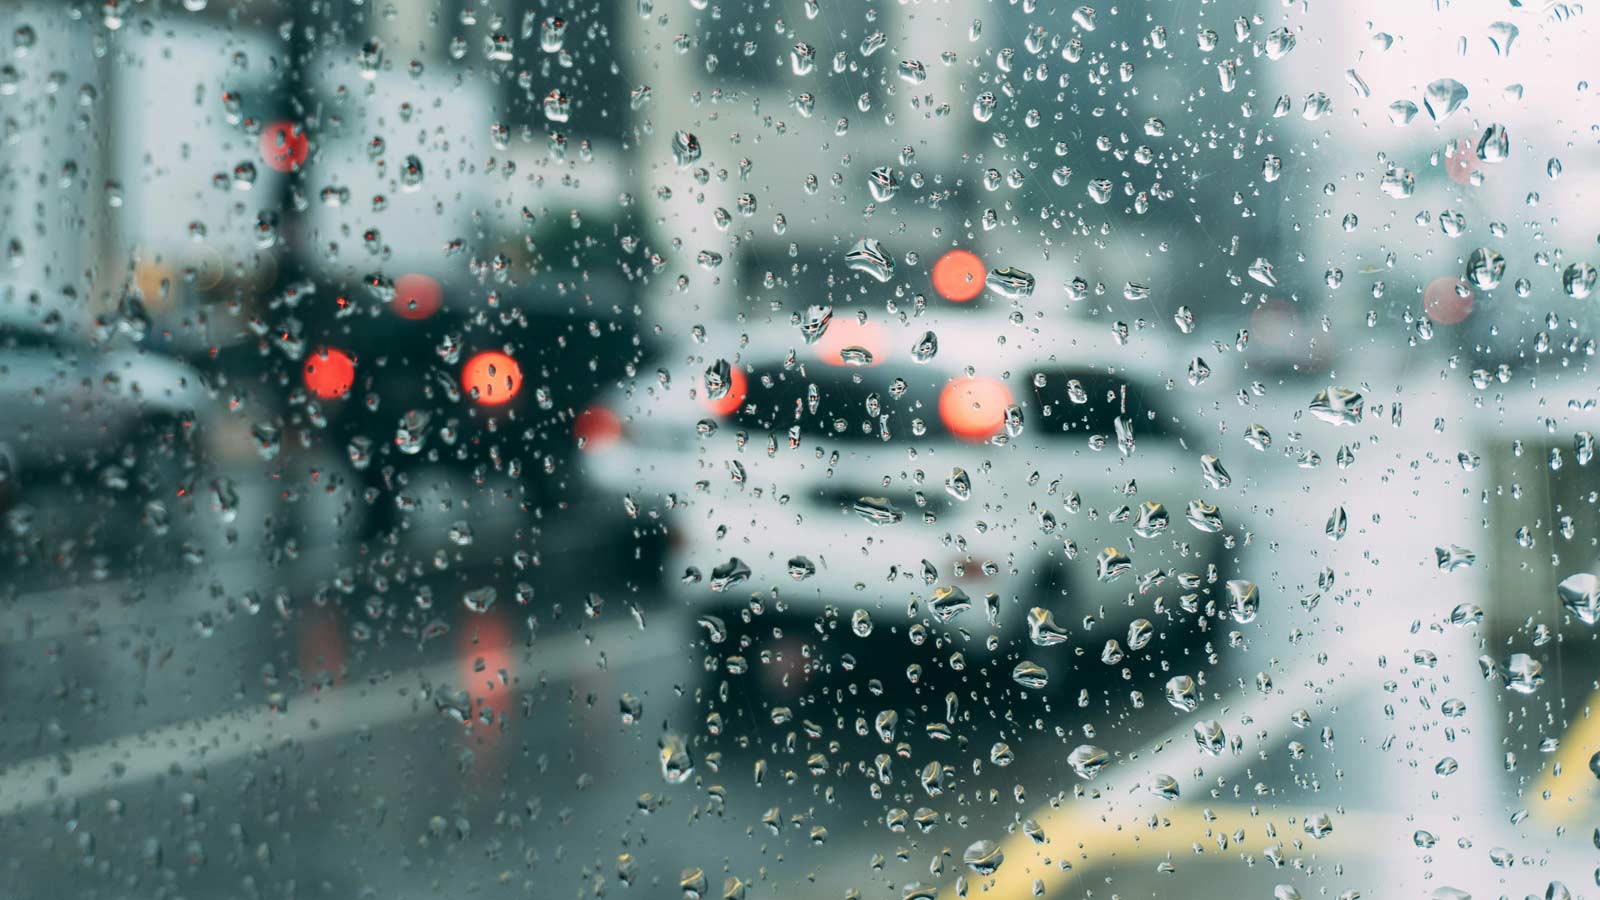 Cars are seen driving on a wet street through drops on a window or windshield on a rainy day....